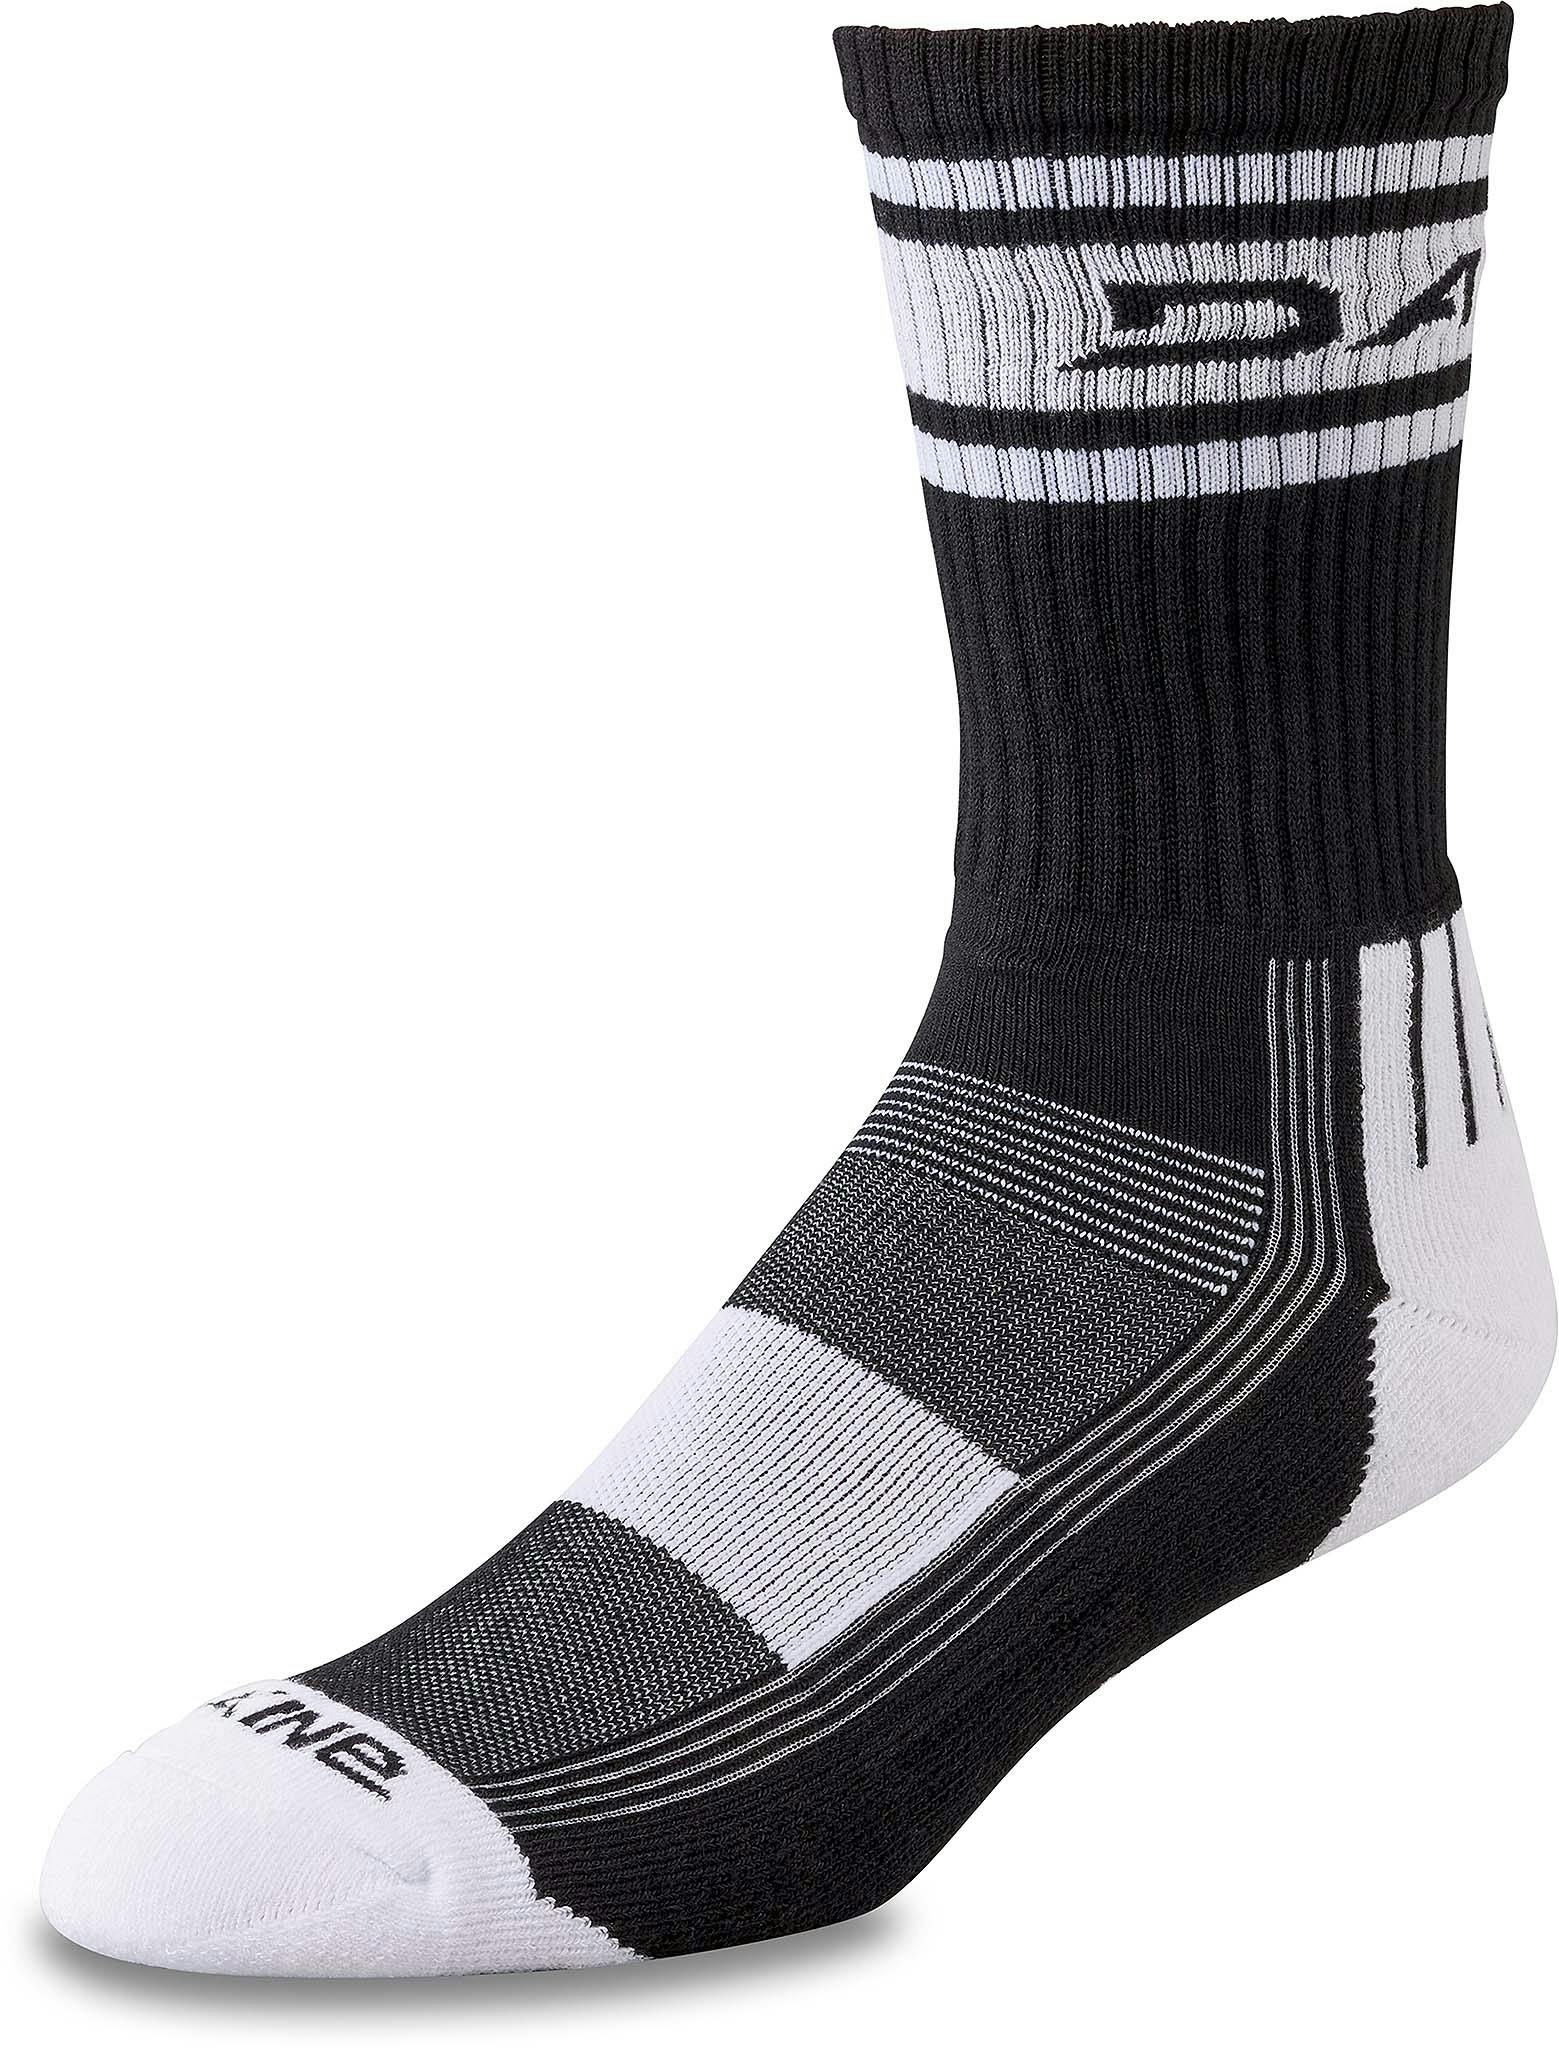 Product image for Step Up Socks